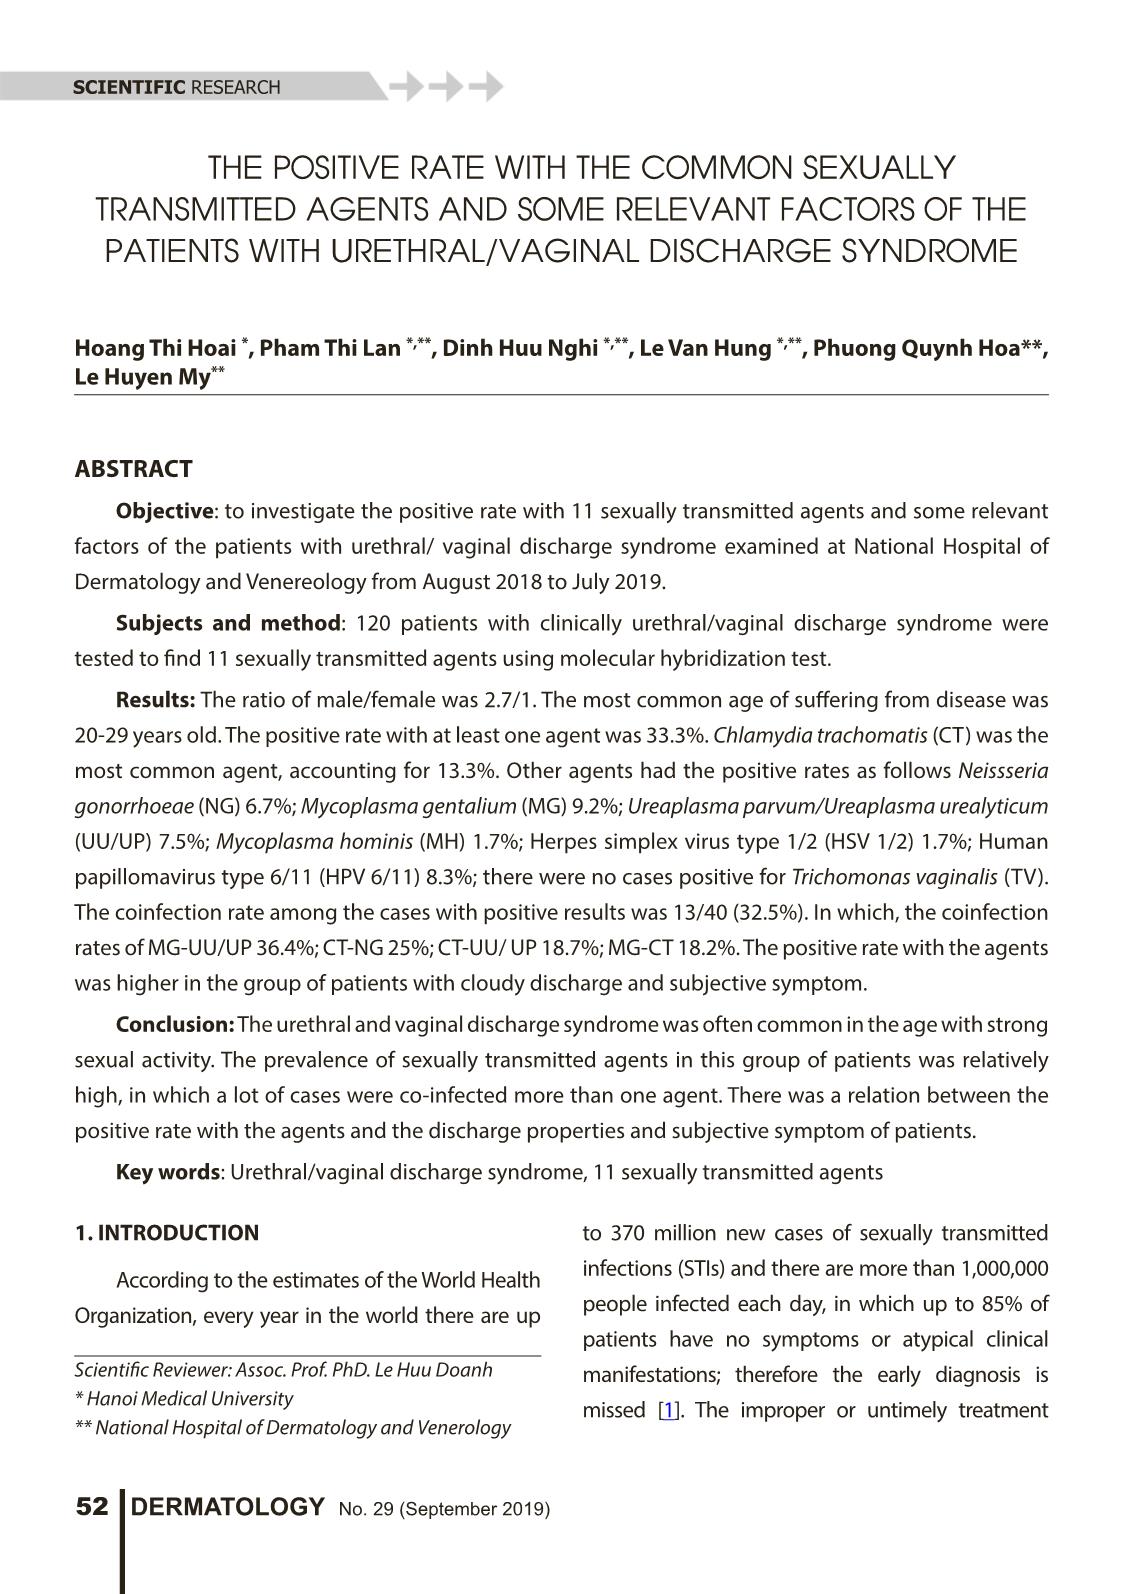 The positive rate with the common sexually transmitted agents and some relevant factors of the patients with urethral/vaginal discharge syndrome trang 1